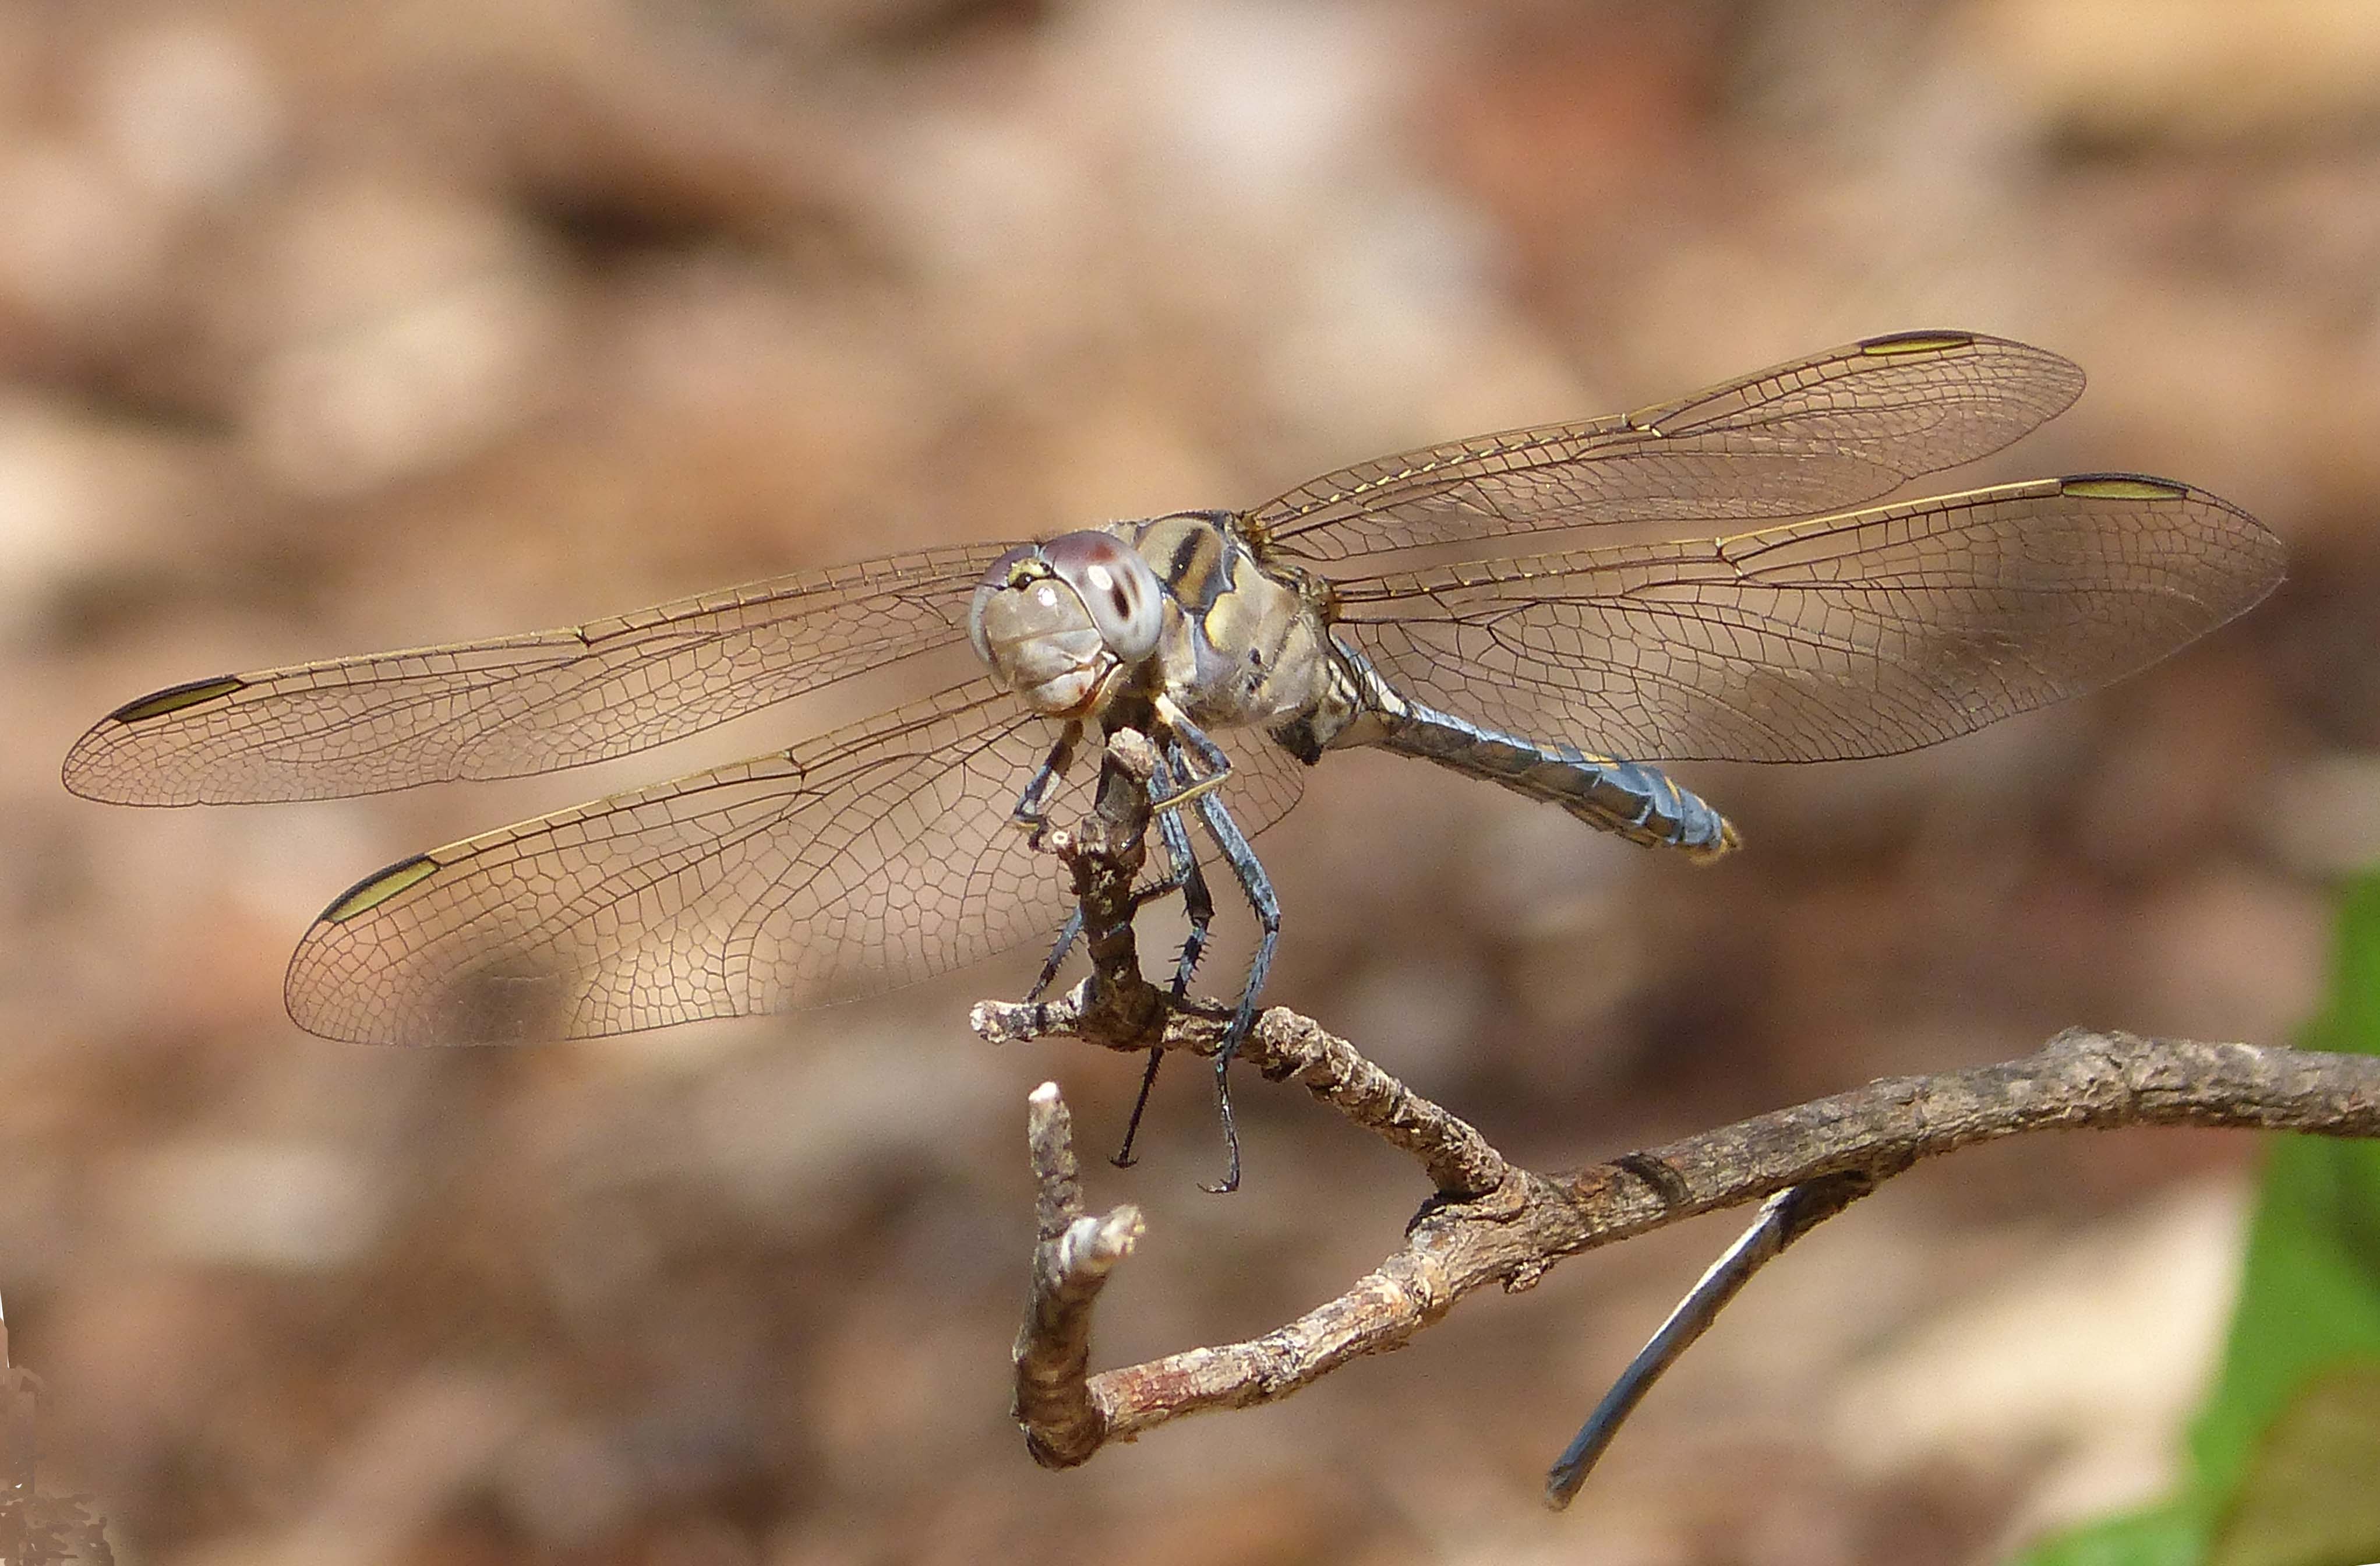 Blue Skimmer. Orthetrum caledonicum. Libellulidae. Young Male - Flickr - gailhampshire